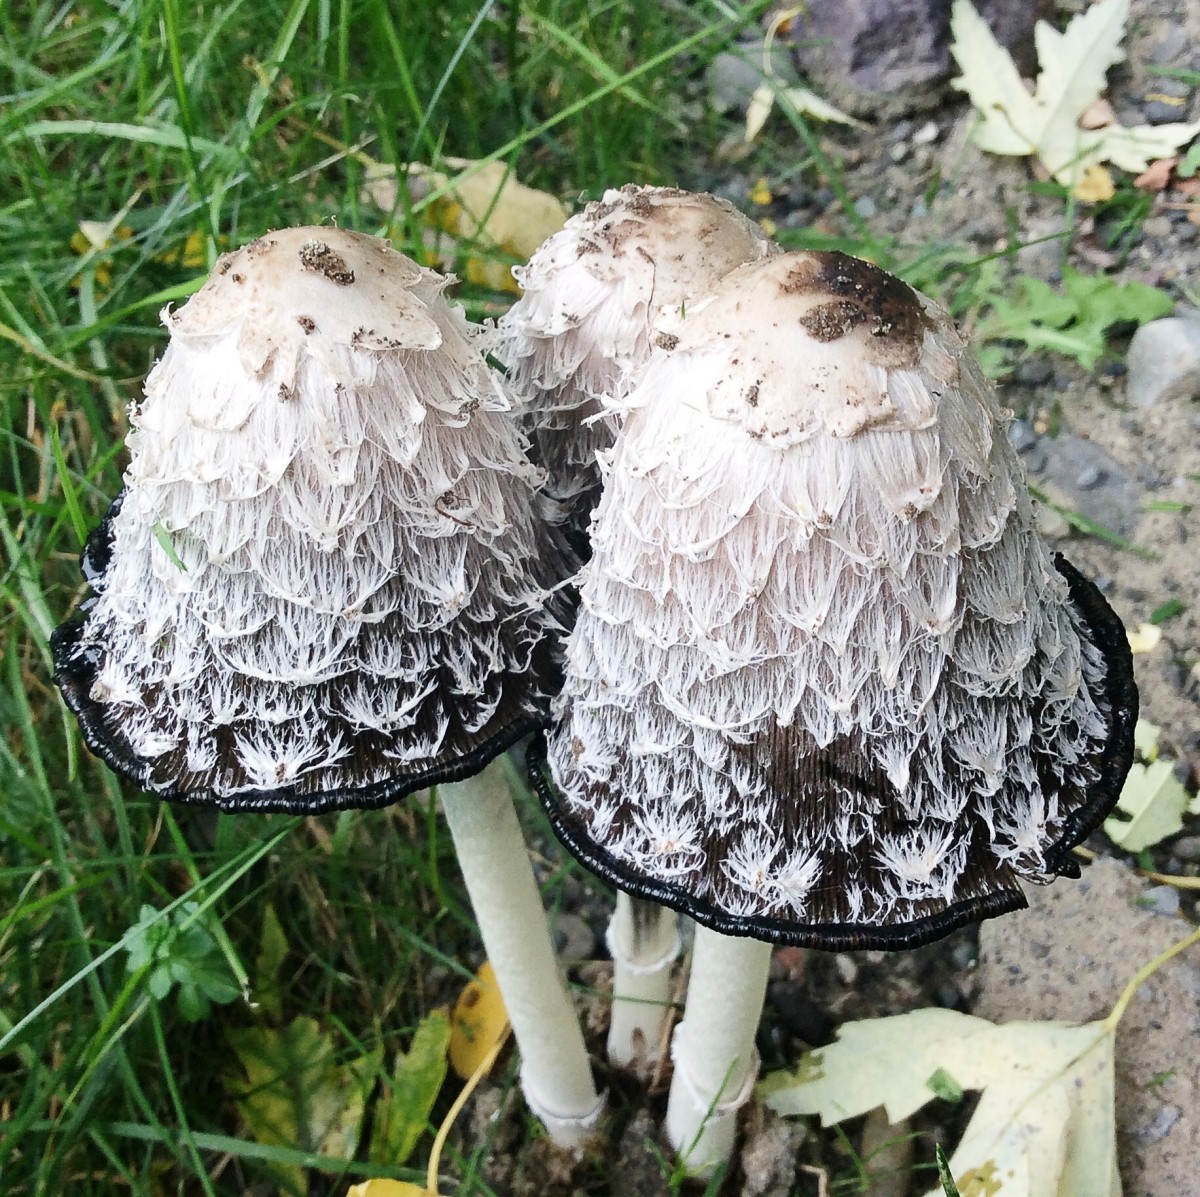 These partially opened shaggy mane mushrooms have an interesting surface texture.